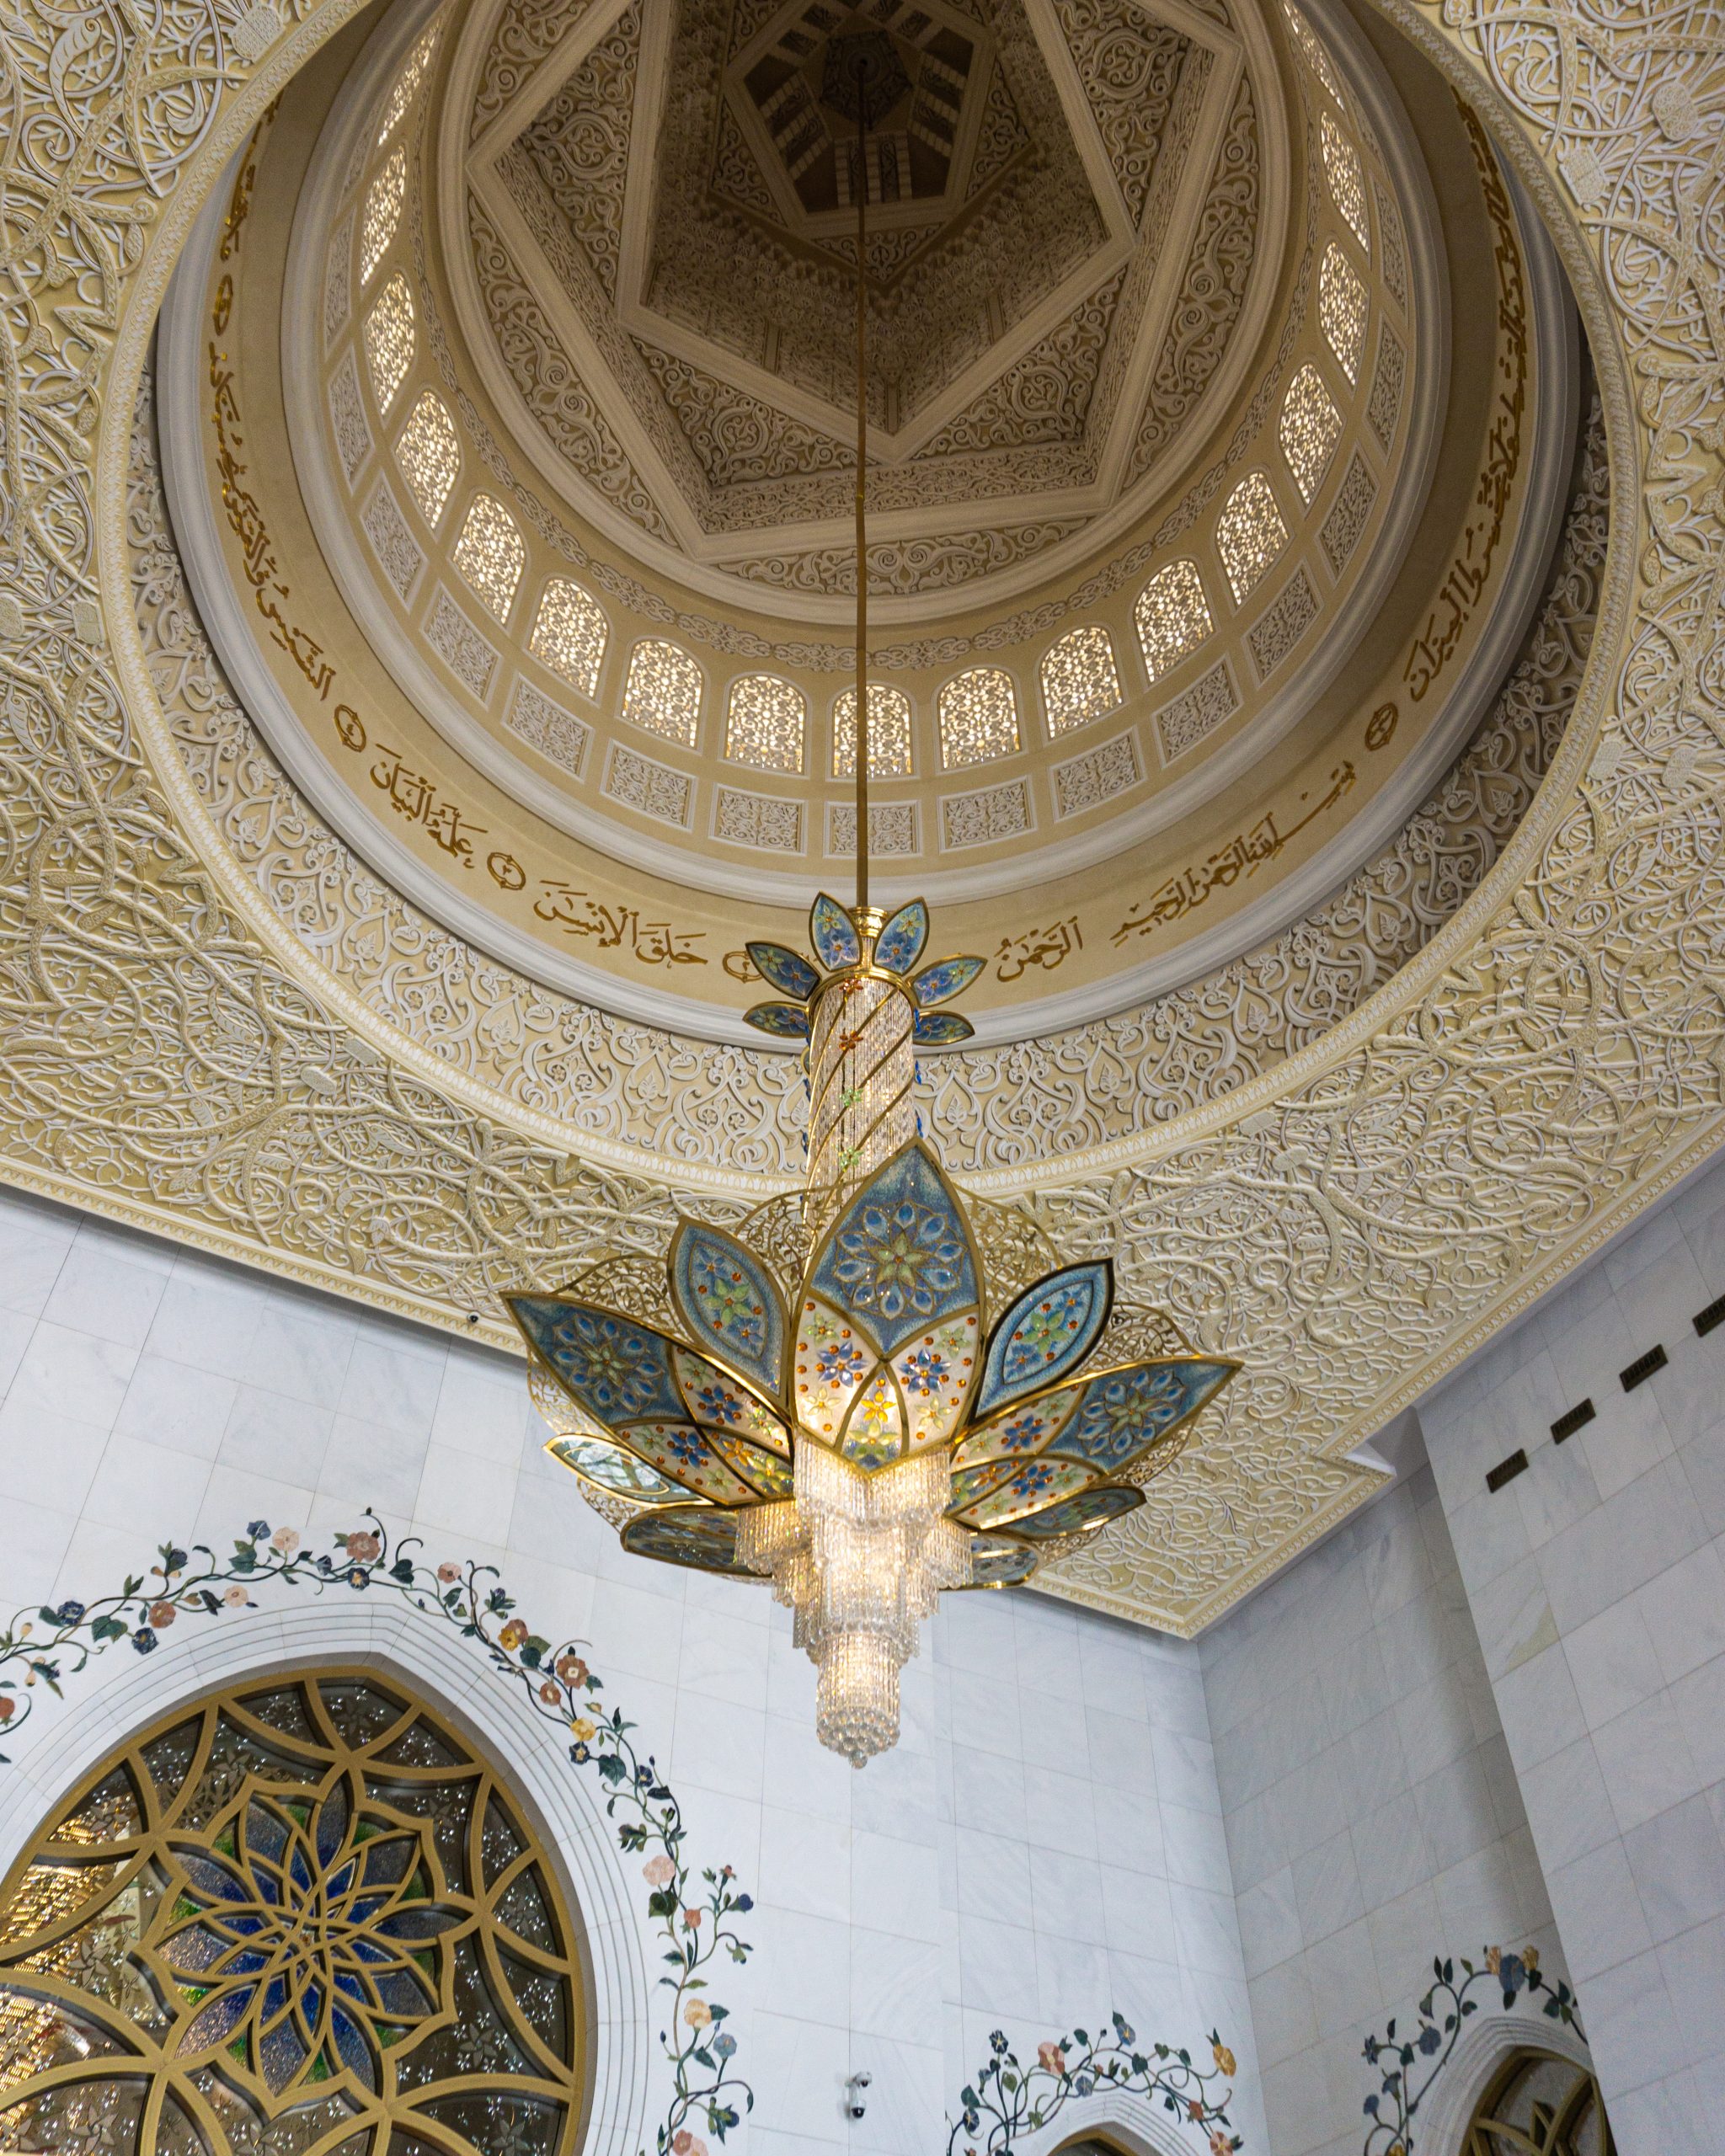 A chandelier at the Sheikh Zayed Grand Mosque in Abu Dhabi